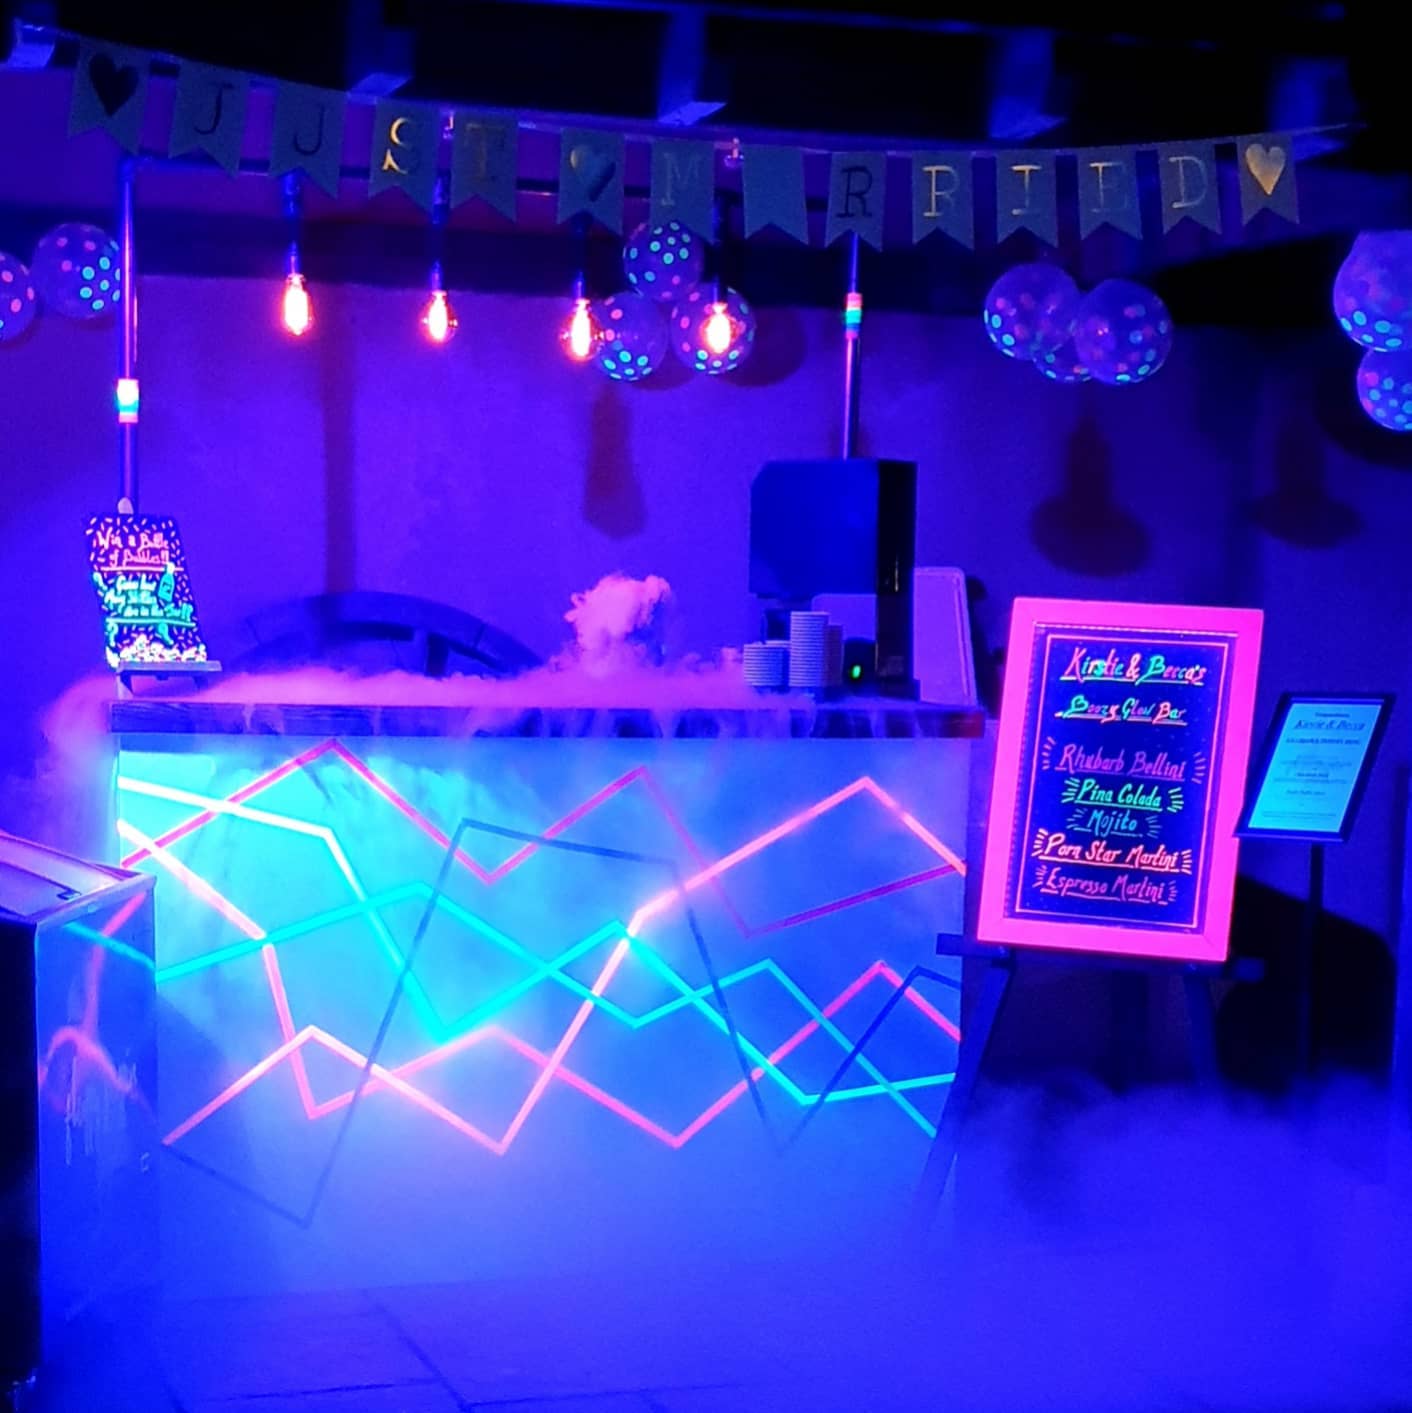 The Fluffy Puffin's glow in the dark set up at this stunning wedding!